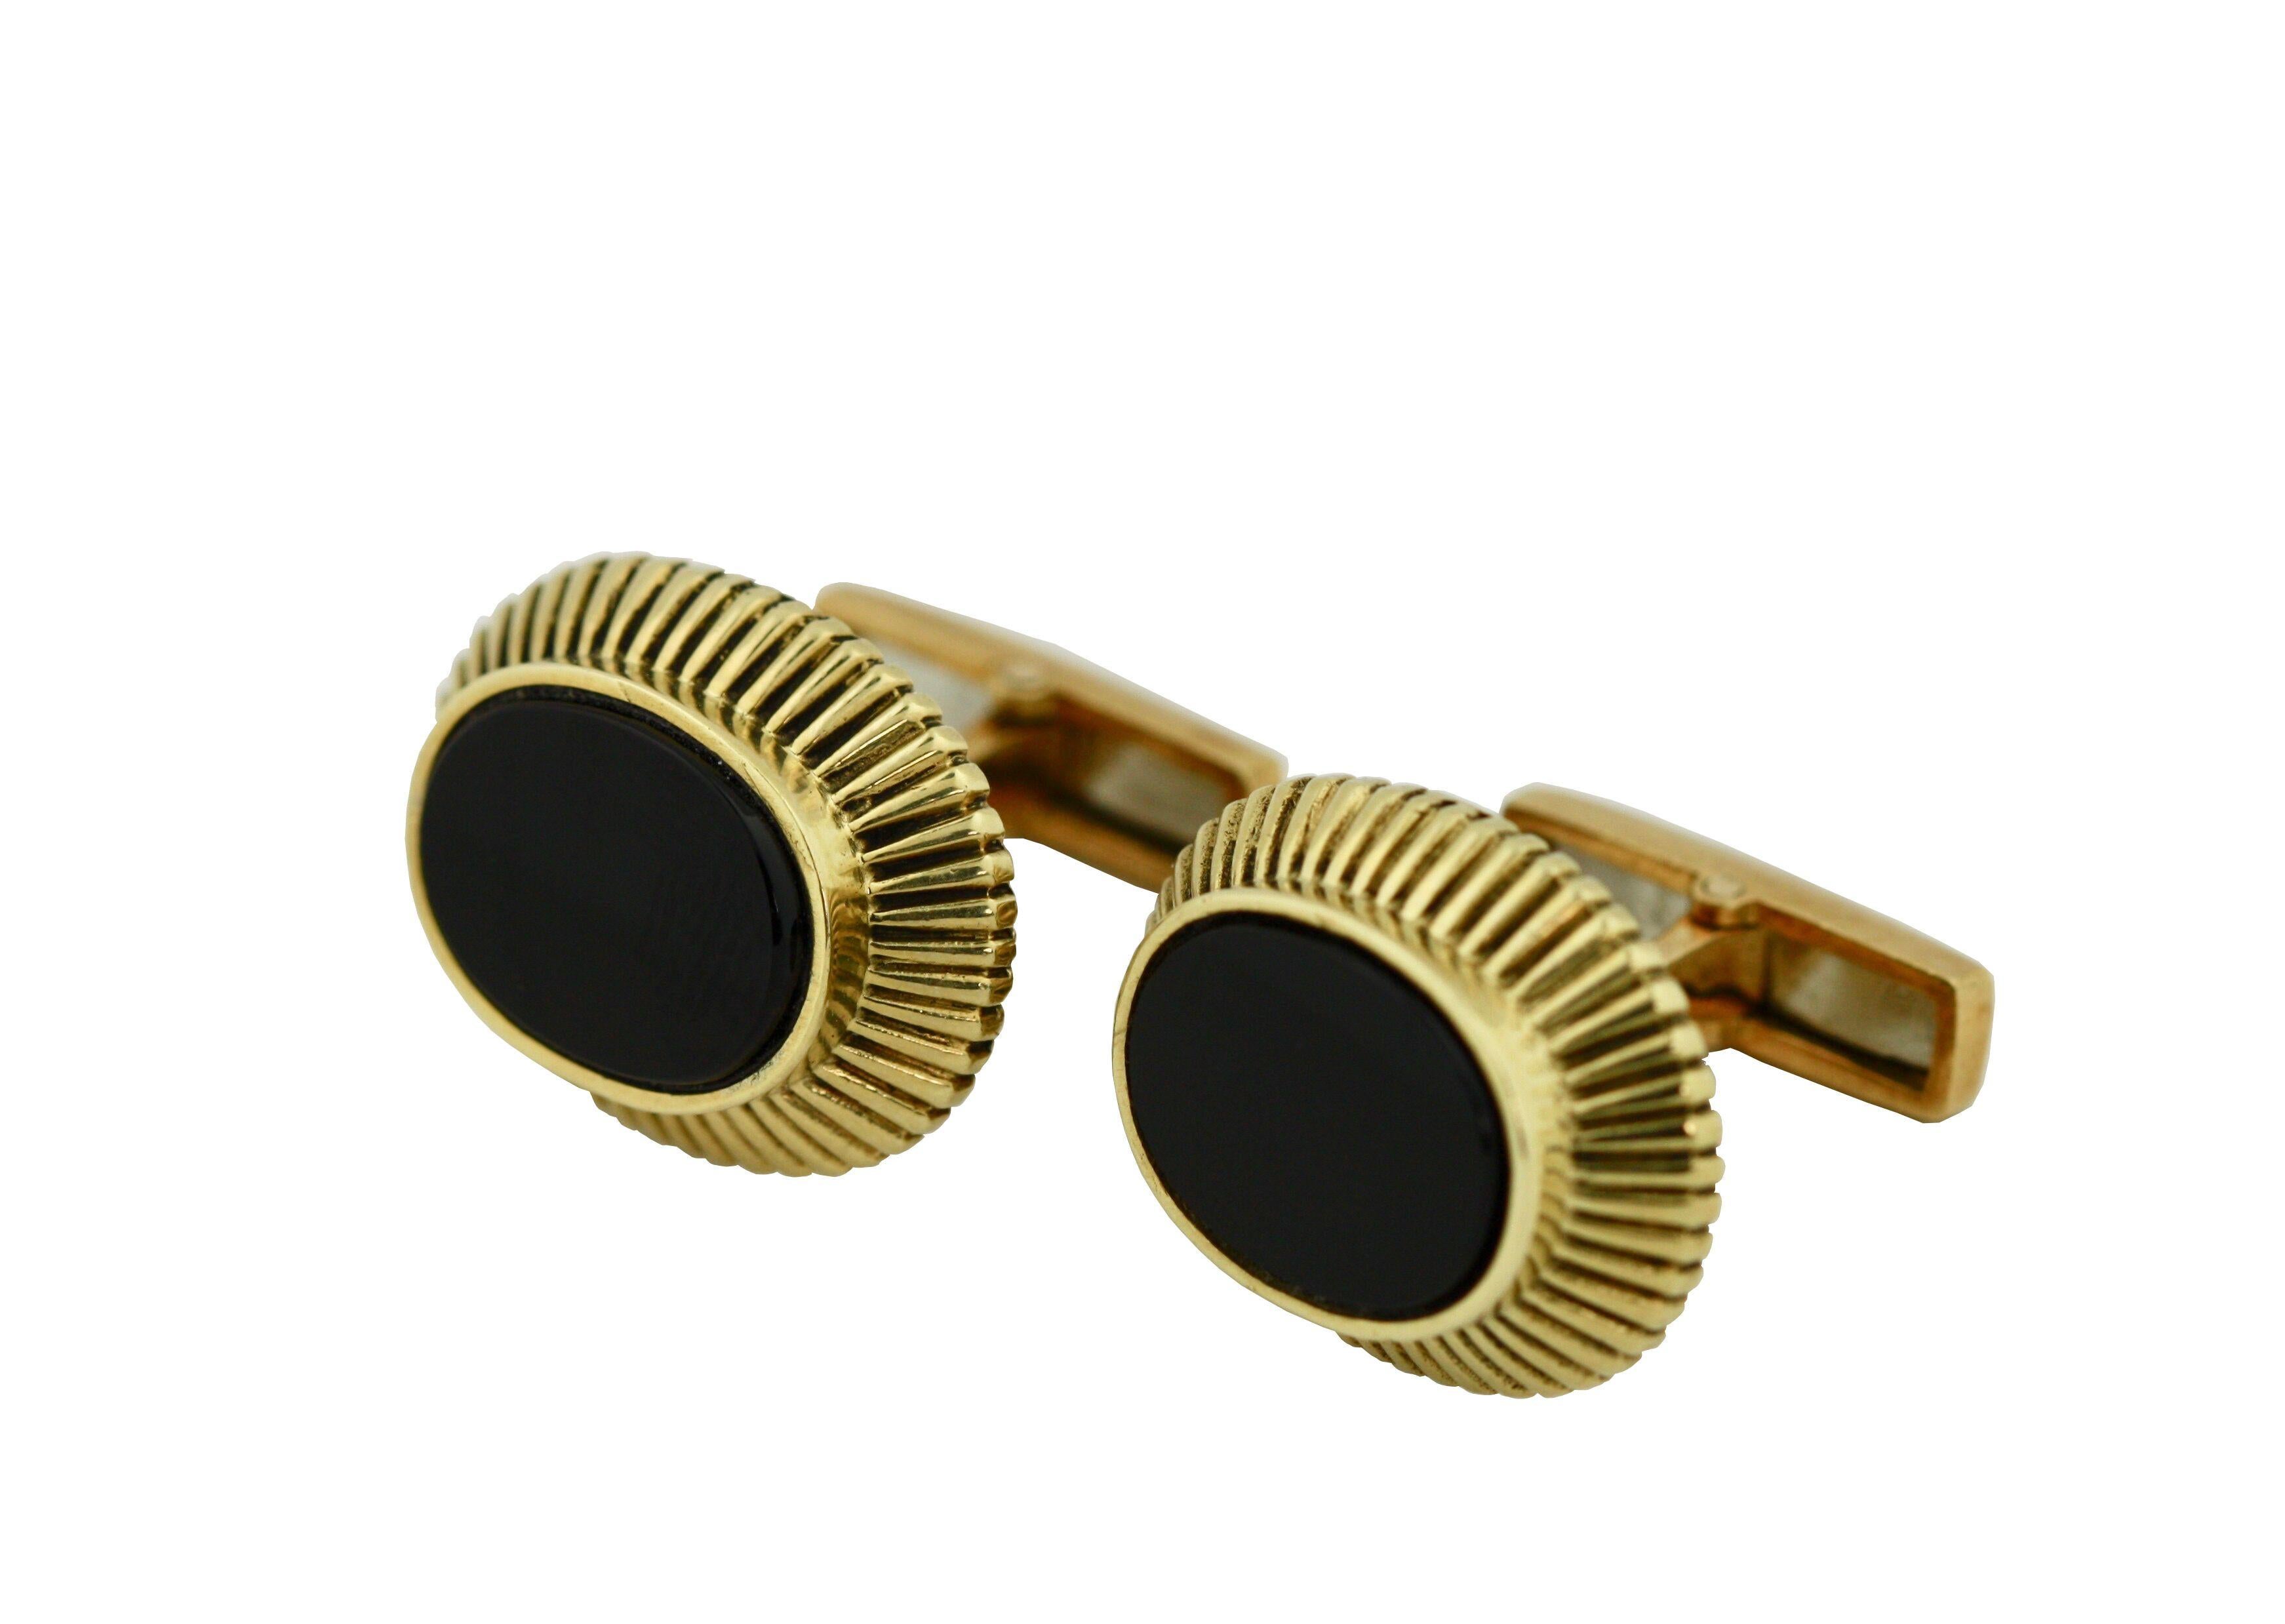 Pair of 18 Karat Gold and Onyx Cufflinks, Emis For Sale 1